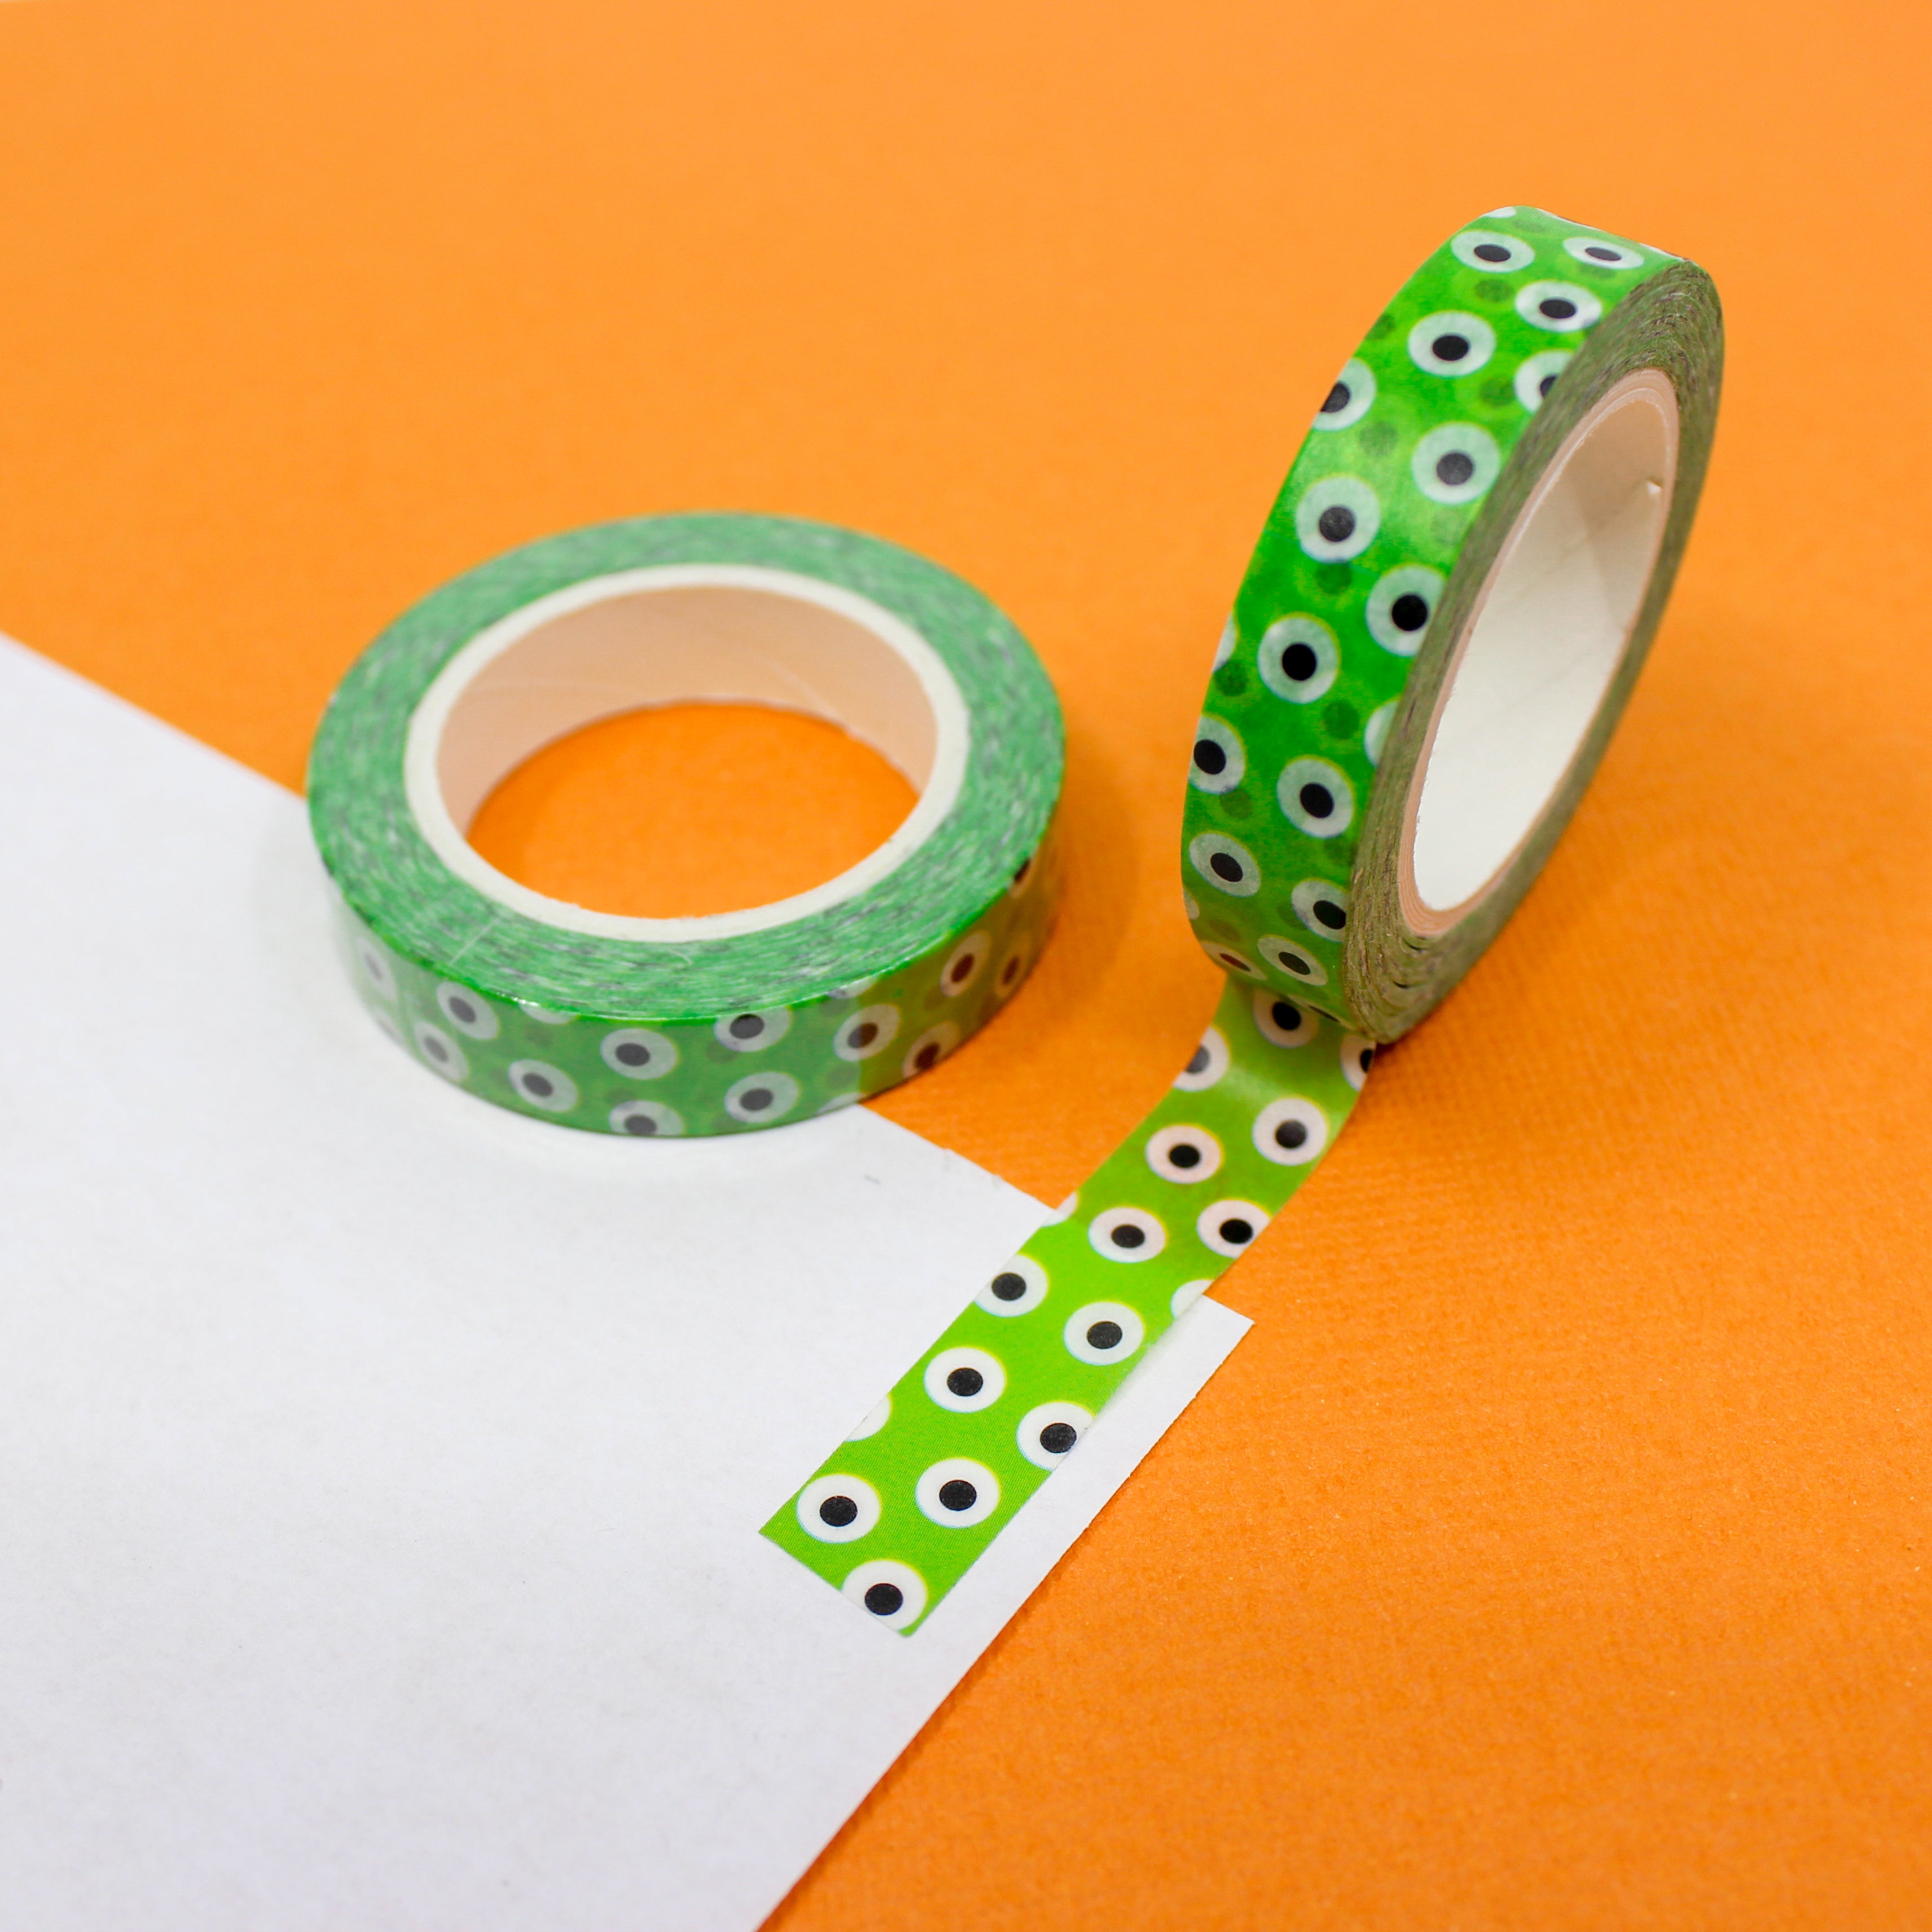 This is a monster Halloween green eyes washi tape from BBB Supplies Craft Shop